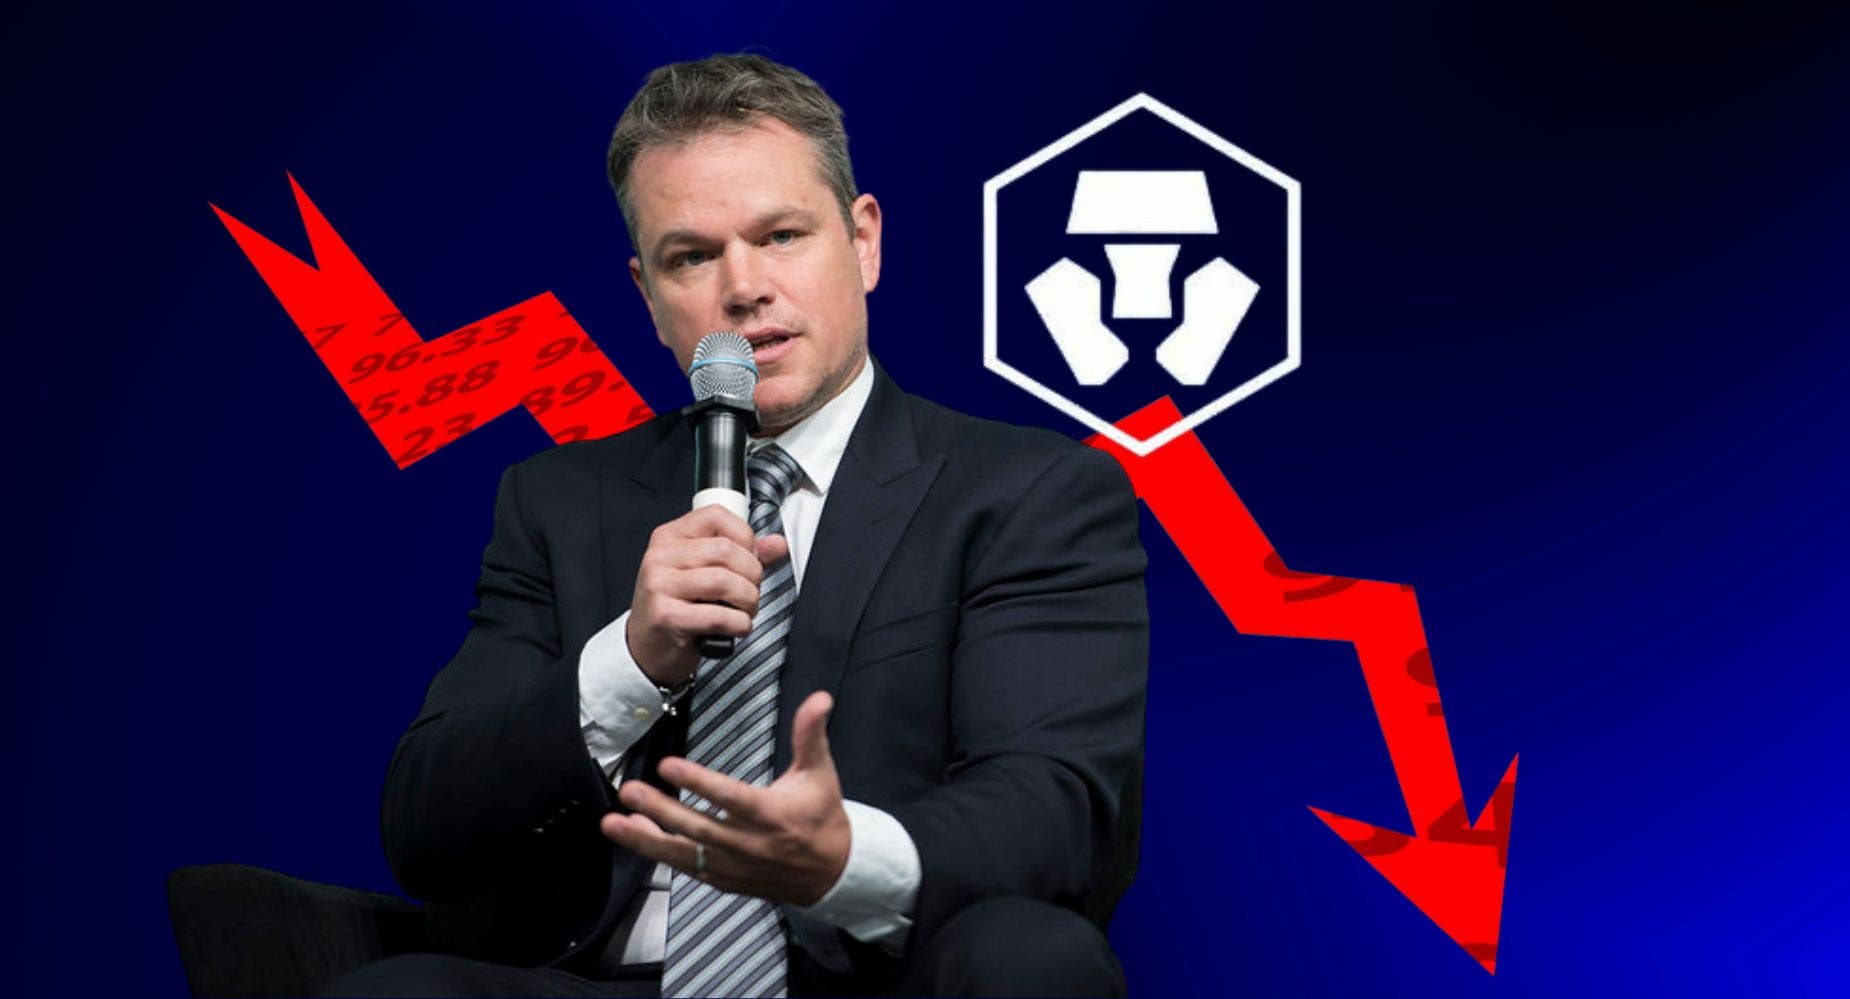 Matt Damon Declared 'Fortune Favors The Brave' In Ad, Now Crypto.com Workers Subject To Layoffs